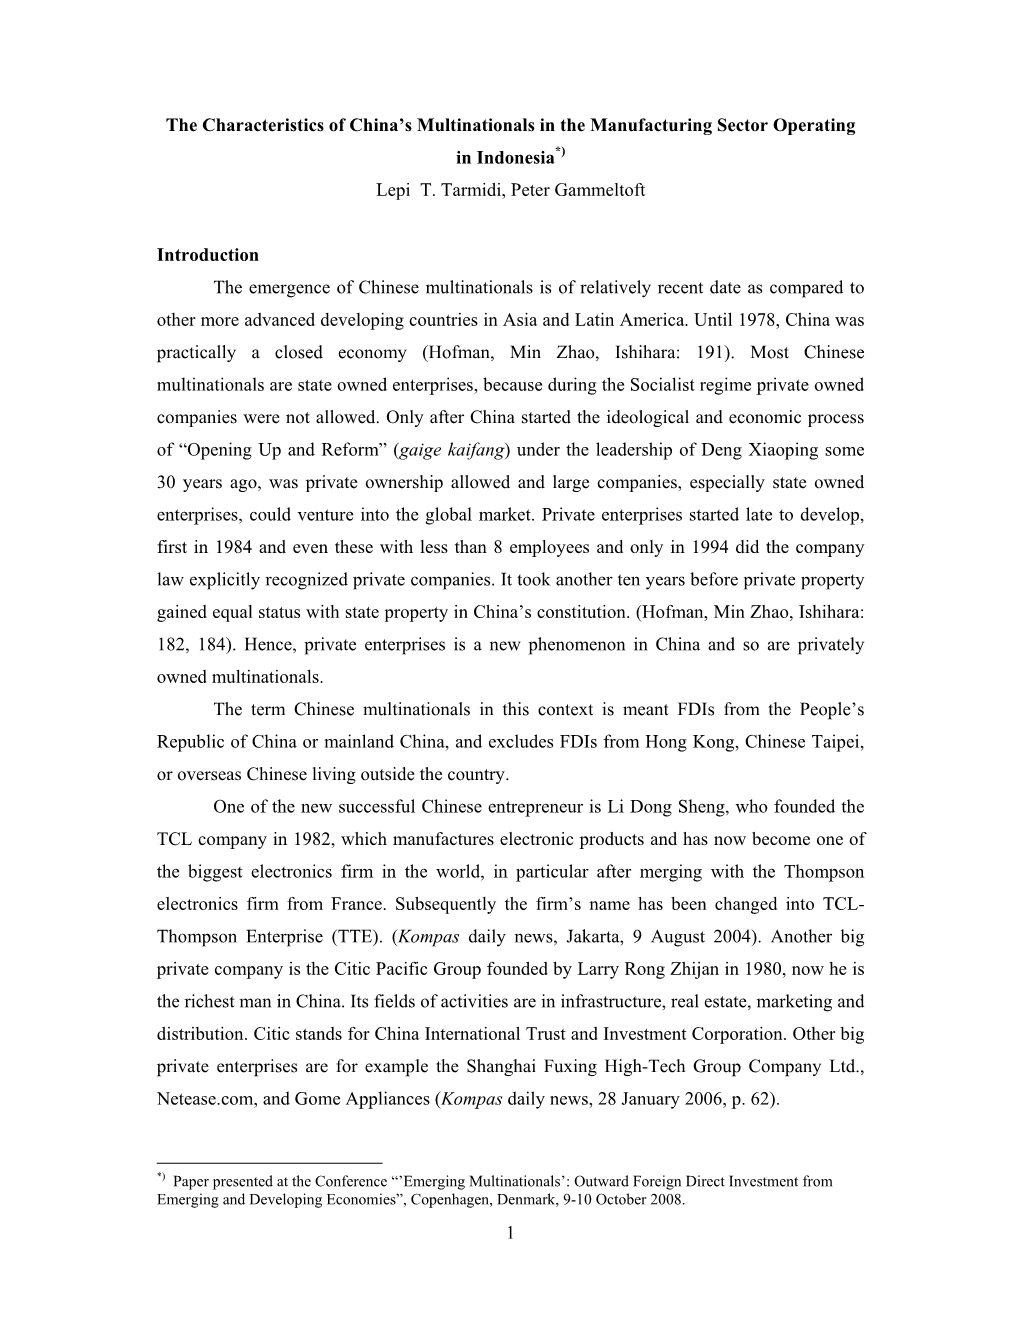 1 the Characteristics of China's Multinationals in the Manufacturing Sector Operating in Indonesia*) Lepi T. Tarmidi, Peter G